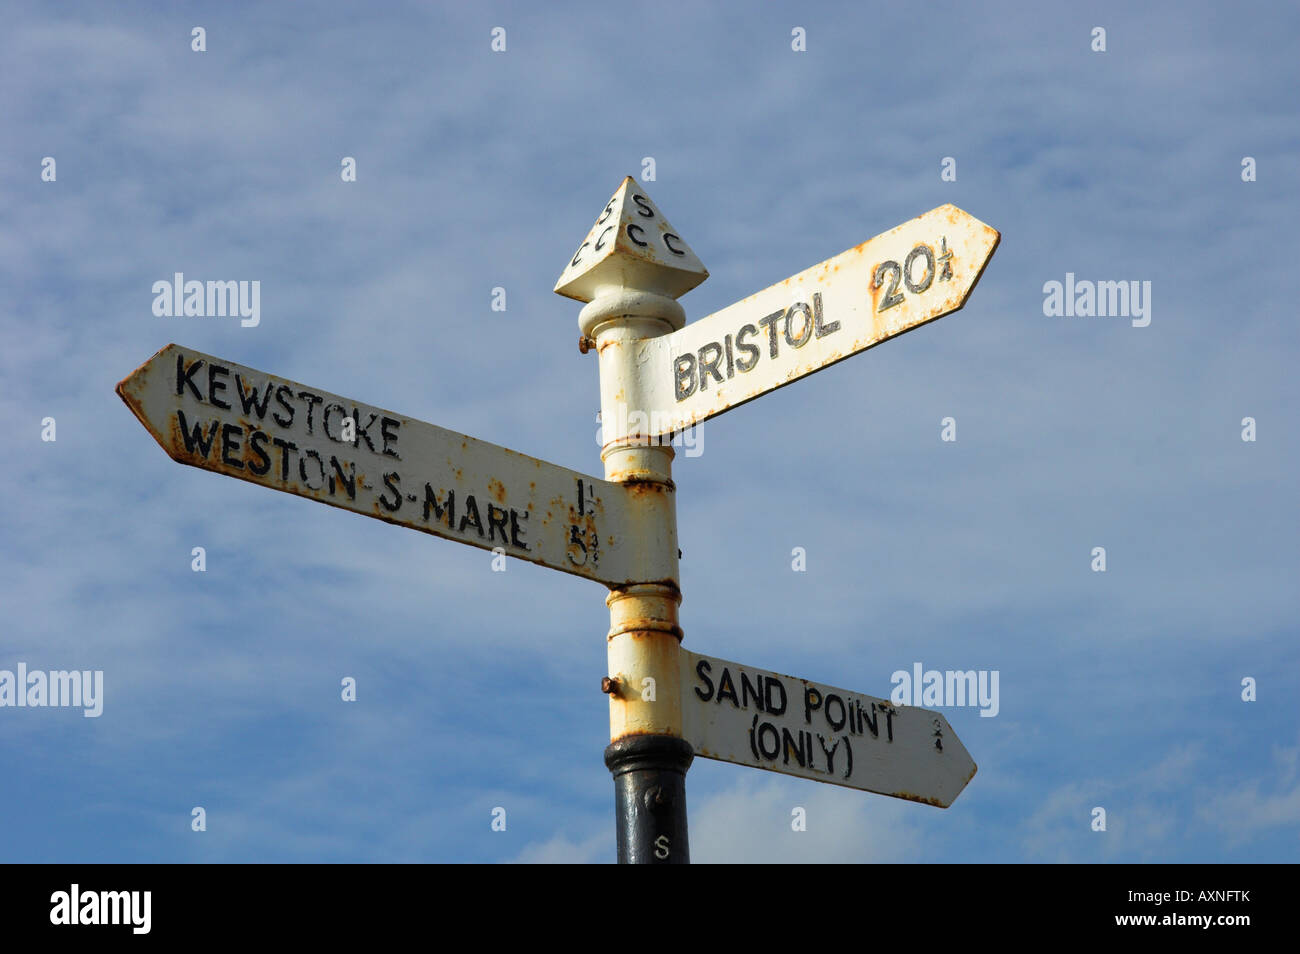 Old street way sign Bristol Weston s Mare Sand Point in England Stock Photo